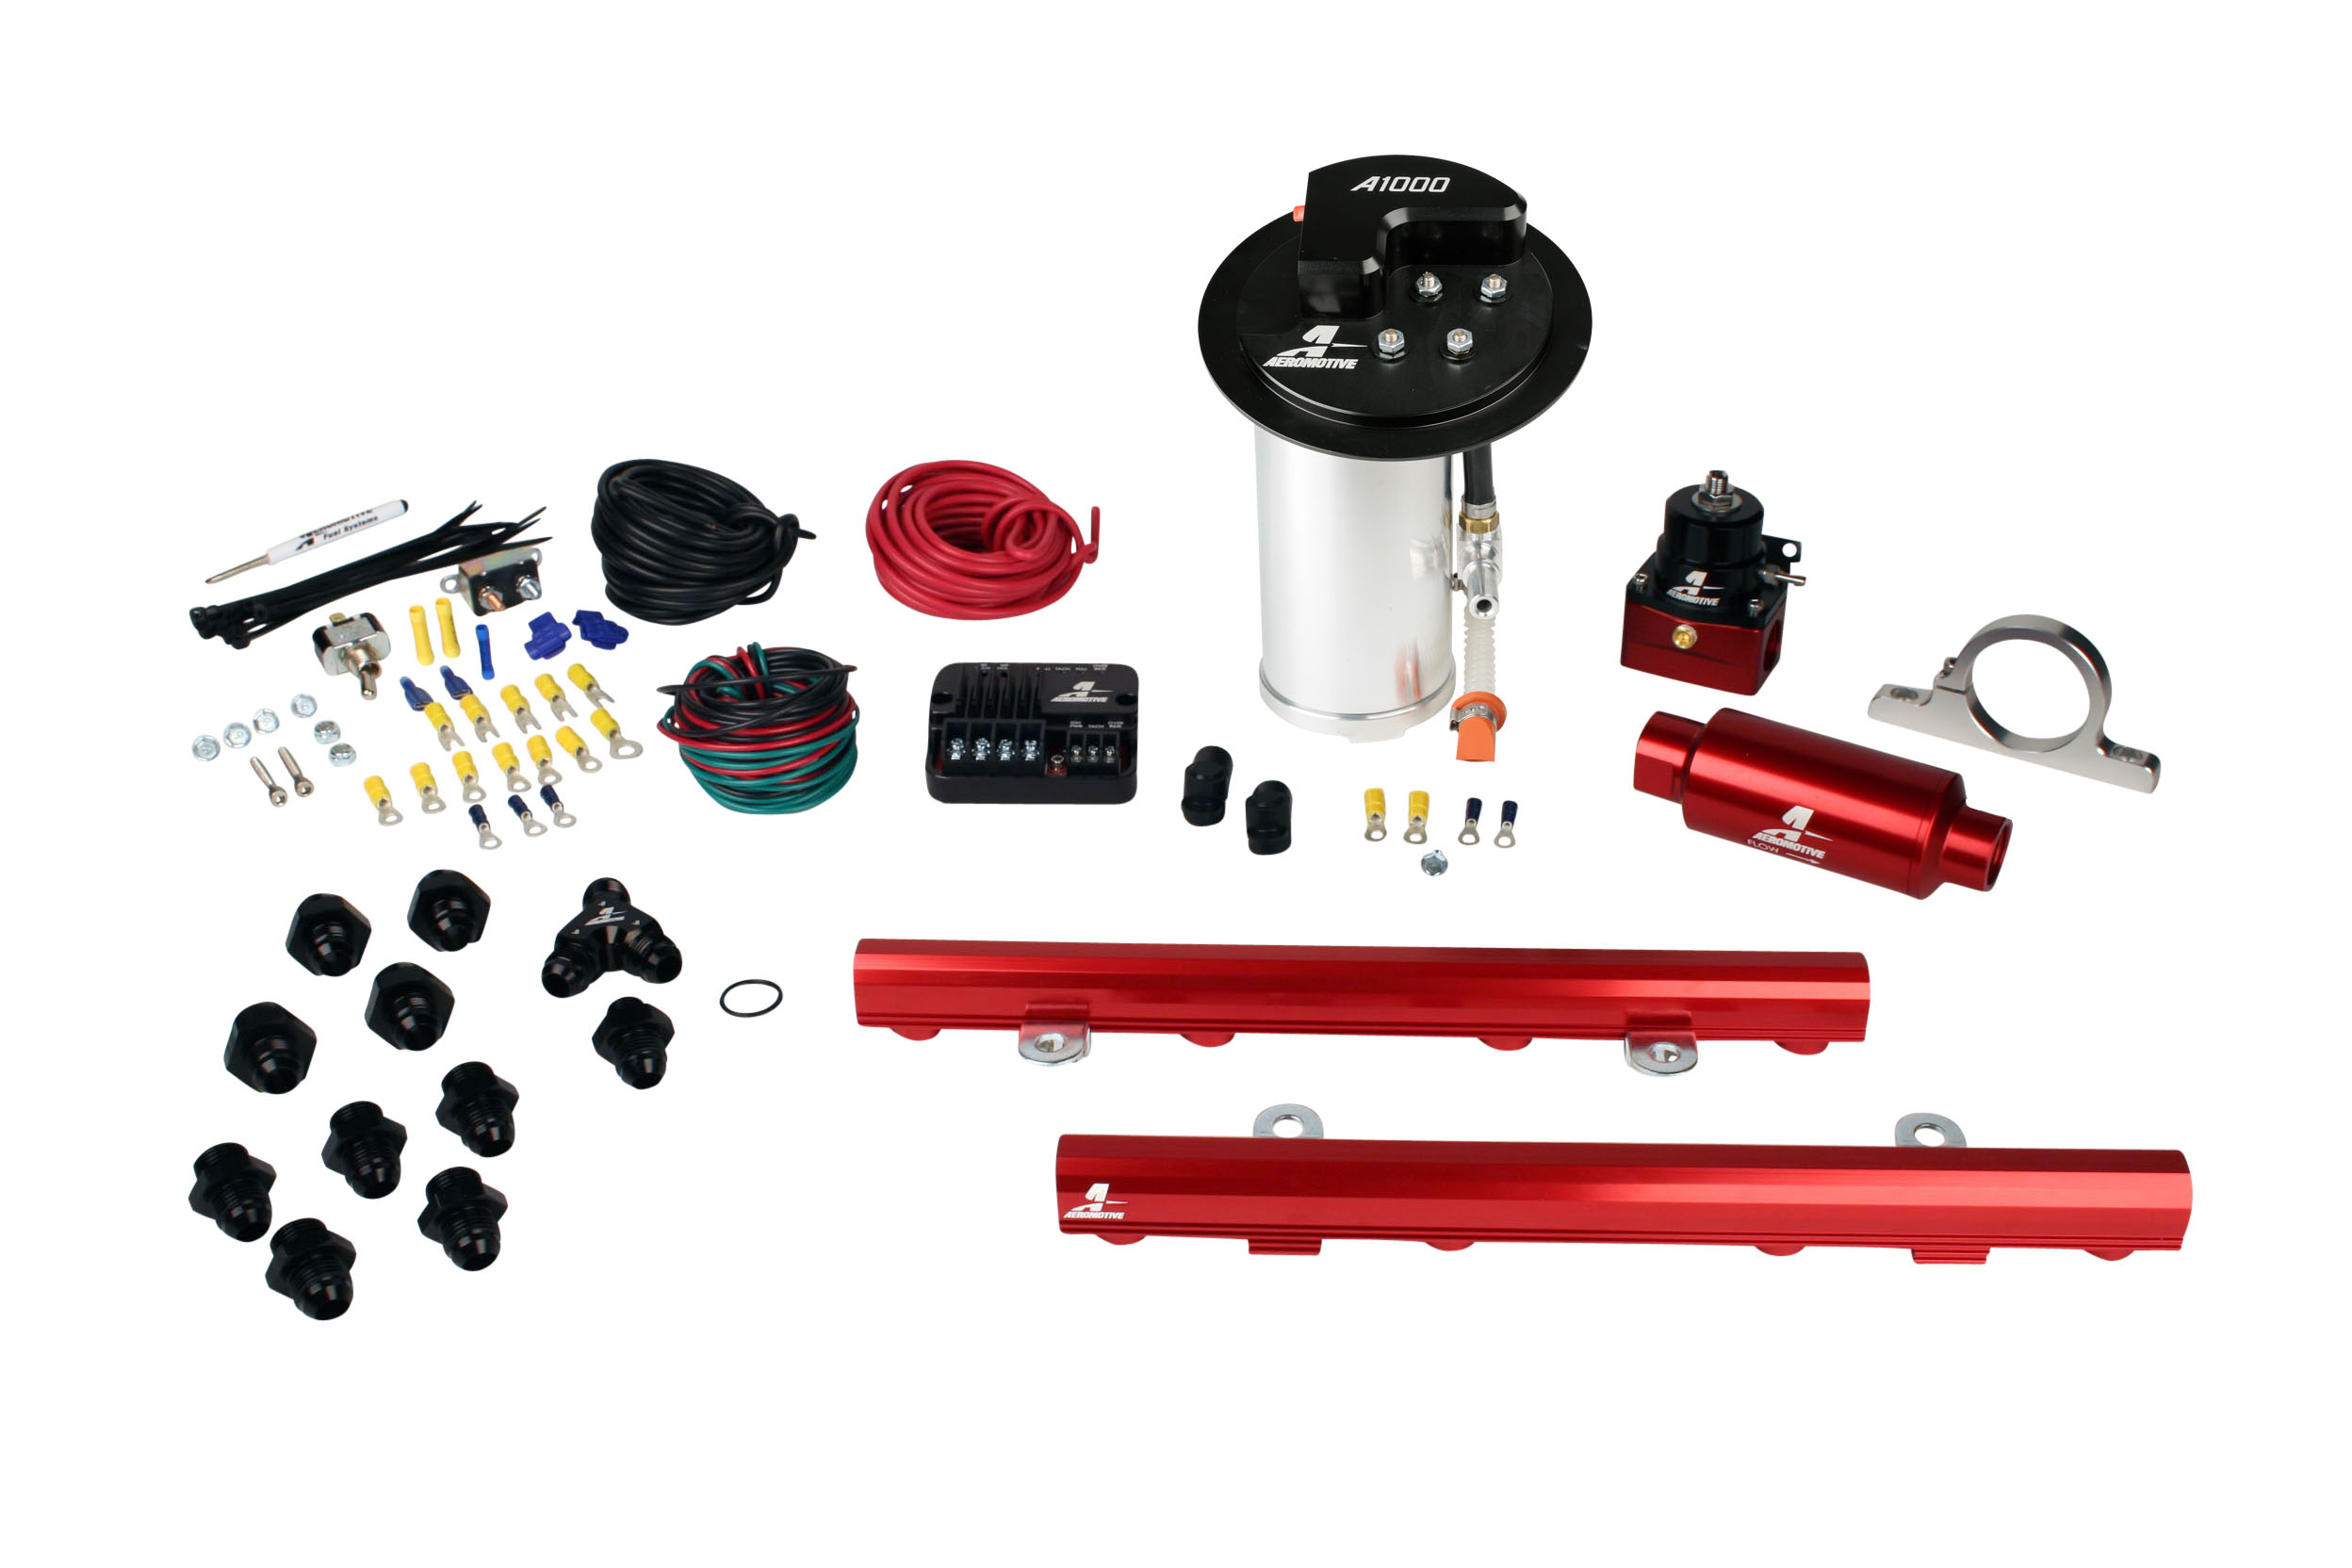 2010-2017 Ford Mustang GT Aeromotive Stealth A1000 Street Fuel System w/5.0L Coyote 4 Valve Fuel Rail